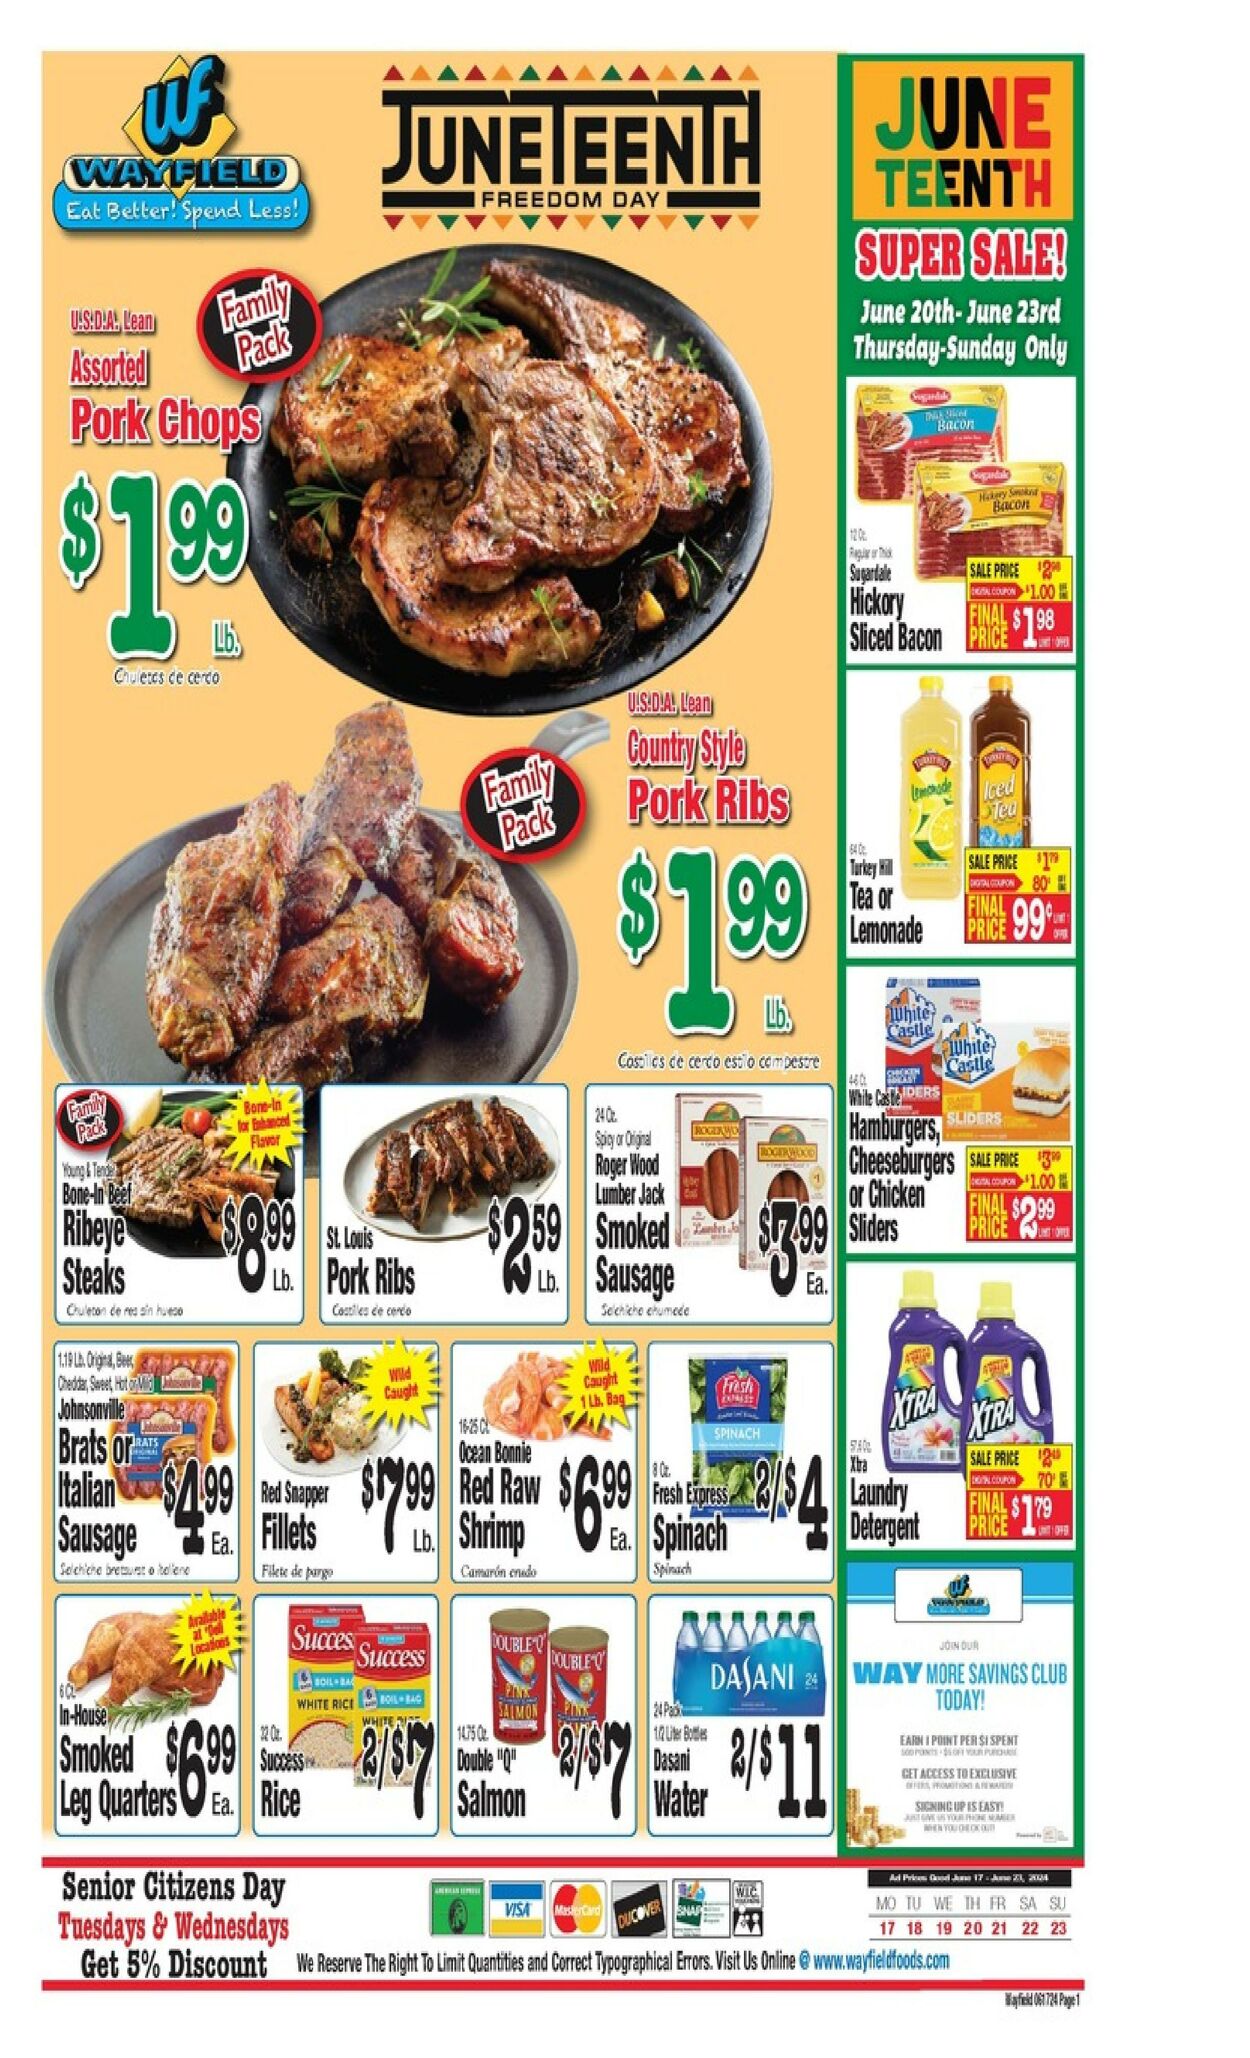 Wayfield Promotional weekly ads